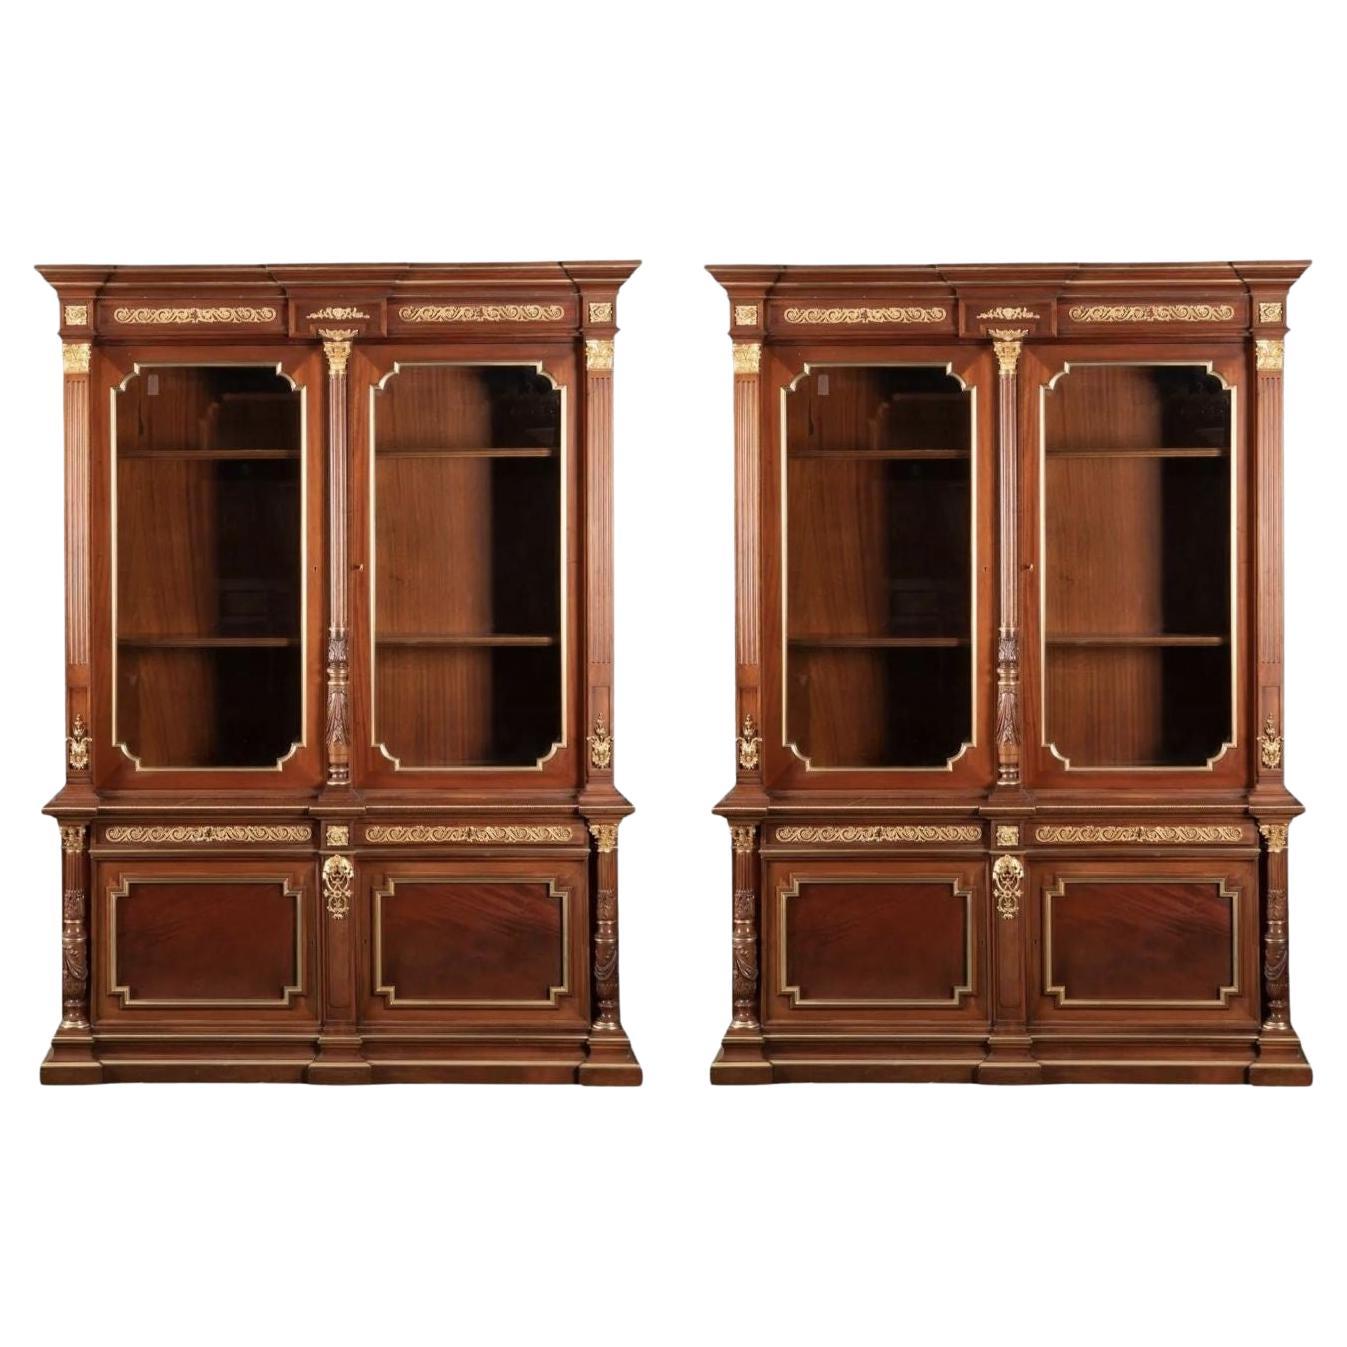 Pair of Early 20th Century Mahogany Russian Bibliotheques For Sale